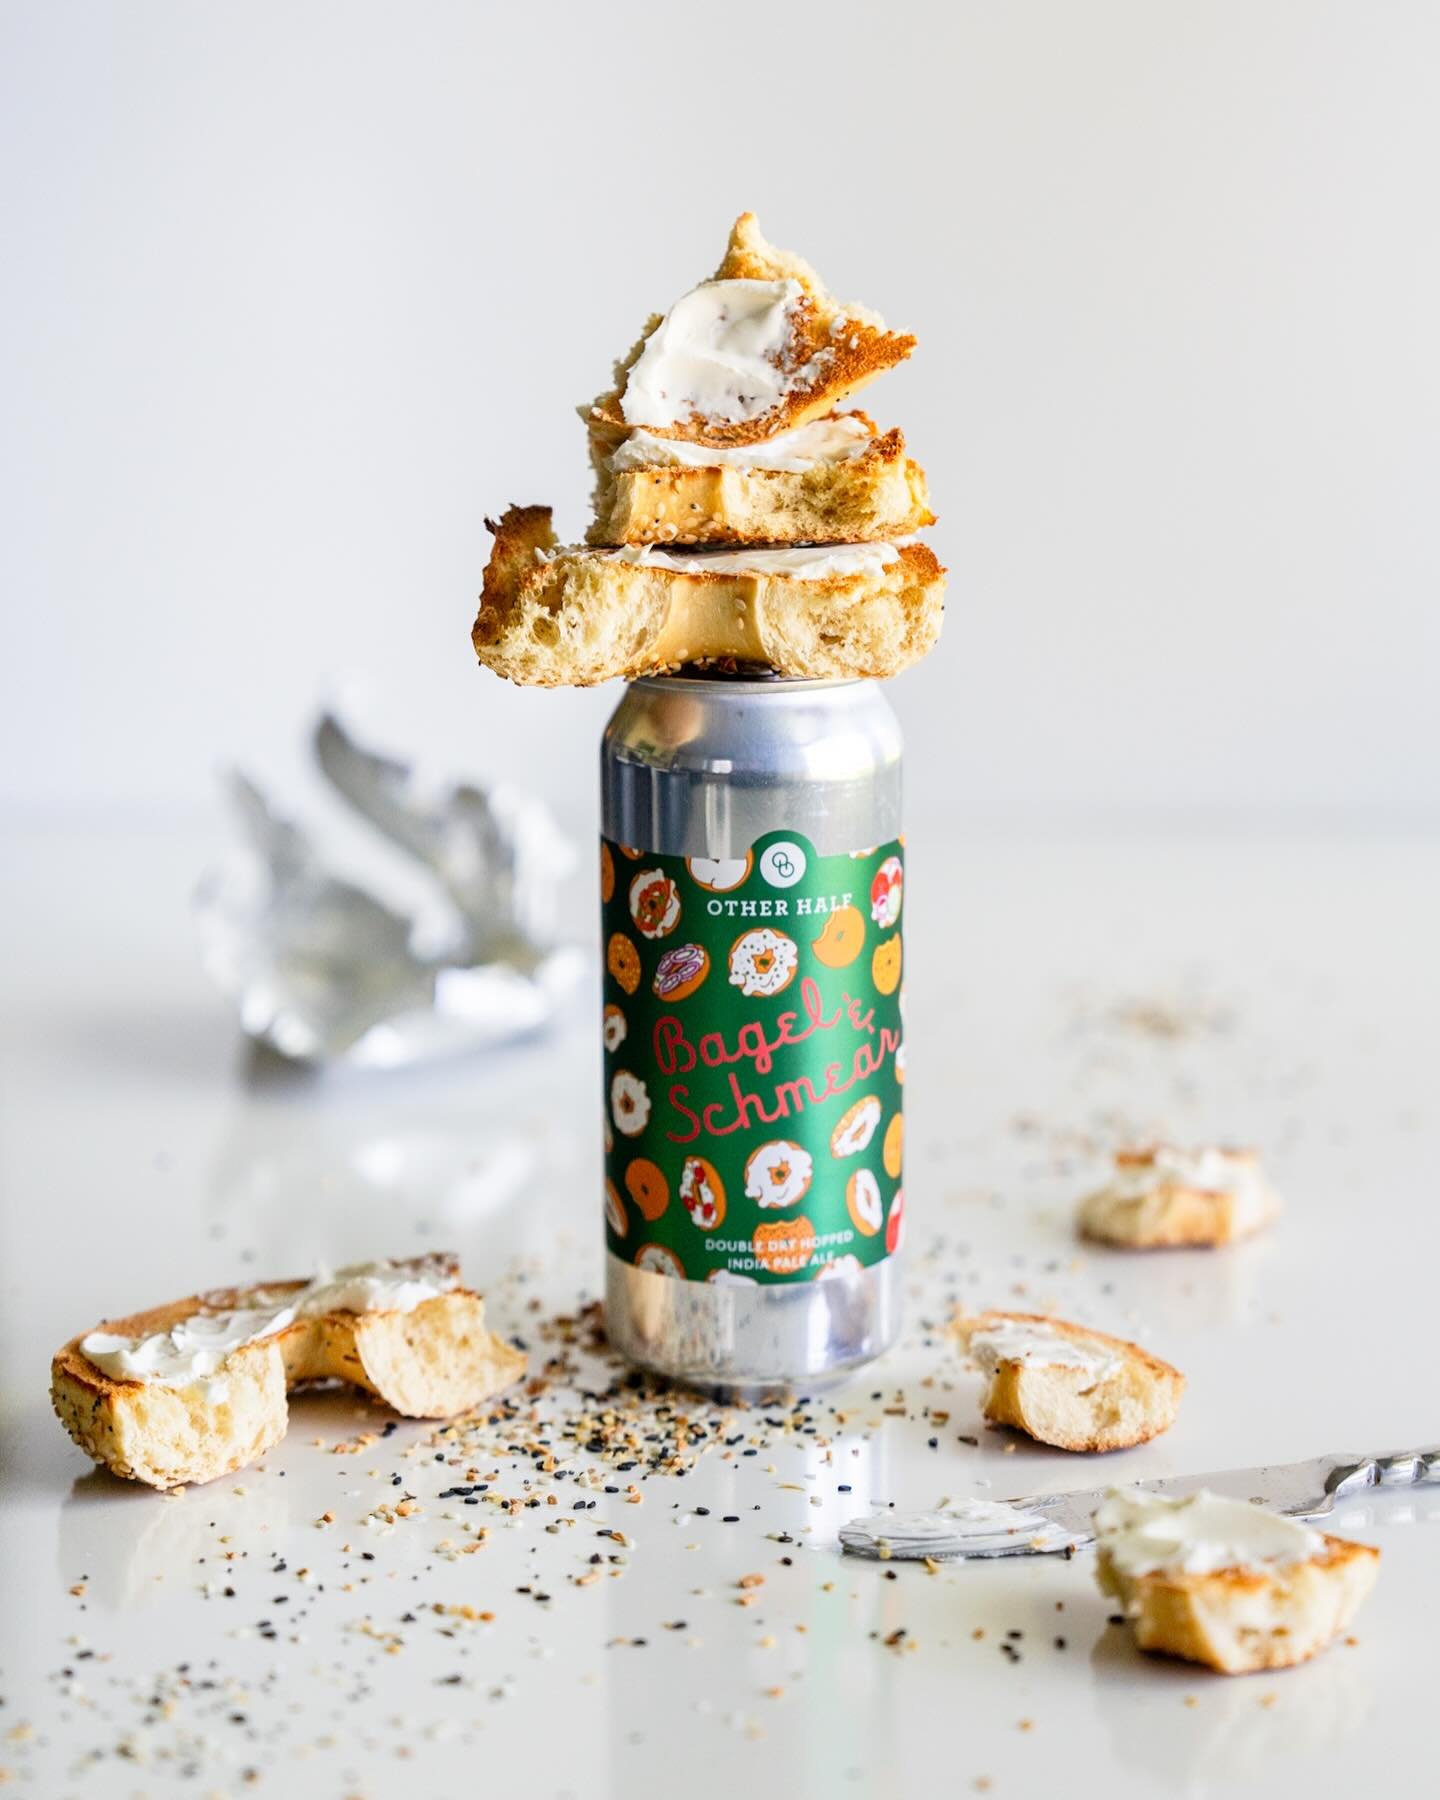 Craving a bagel &amp; hops? @otherhalf.flx has it covered 🤤 

🥯 Bagel &amp; Schmear &mdash; IPA &mdash; Dry hopped w/ Citra, Nelson Sauvin &amp; El Dorado 

🧃 Juice Collector &mdash; Double IPA &mdash; hopped w/ Citra, Citra Incognito, Chinook, Si